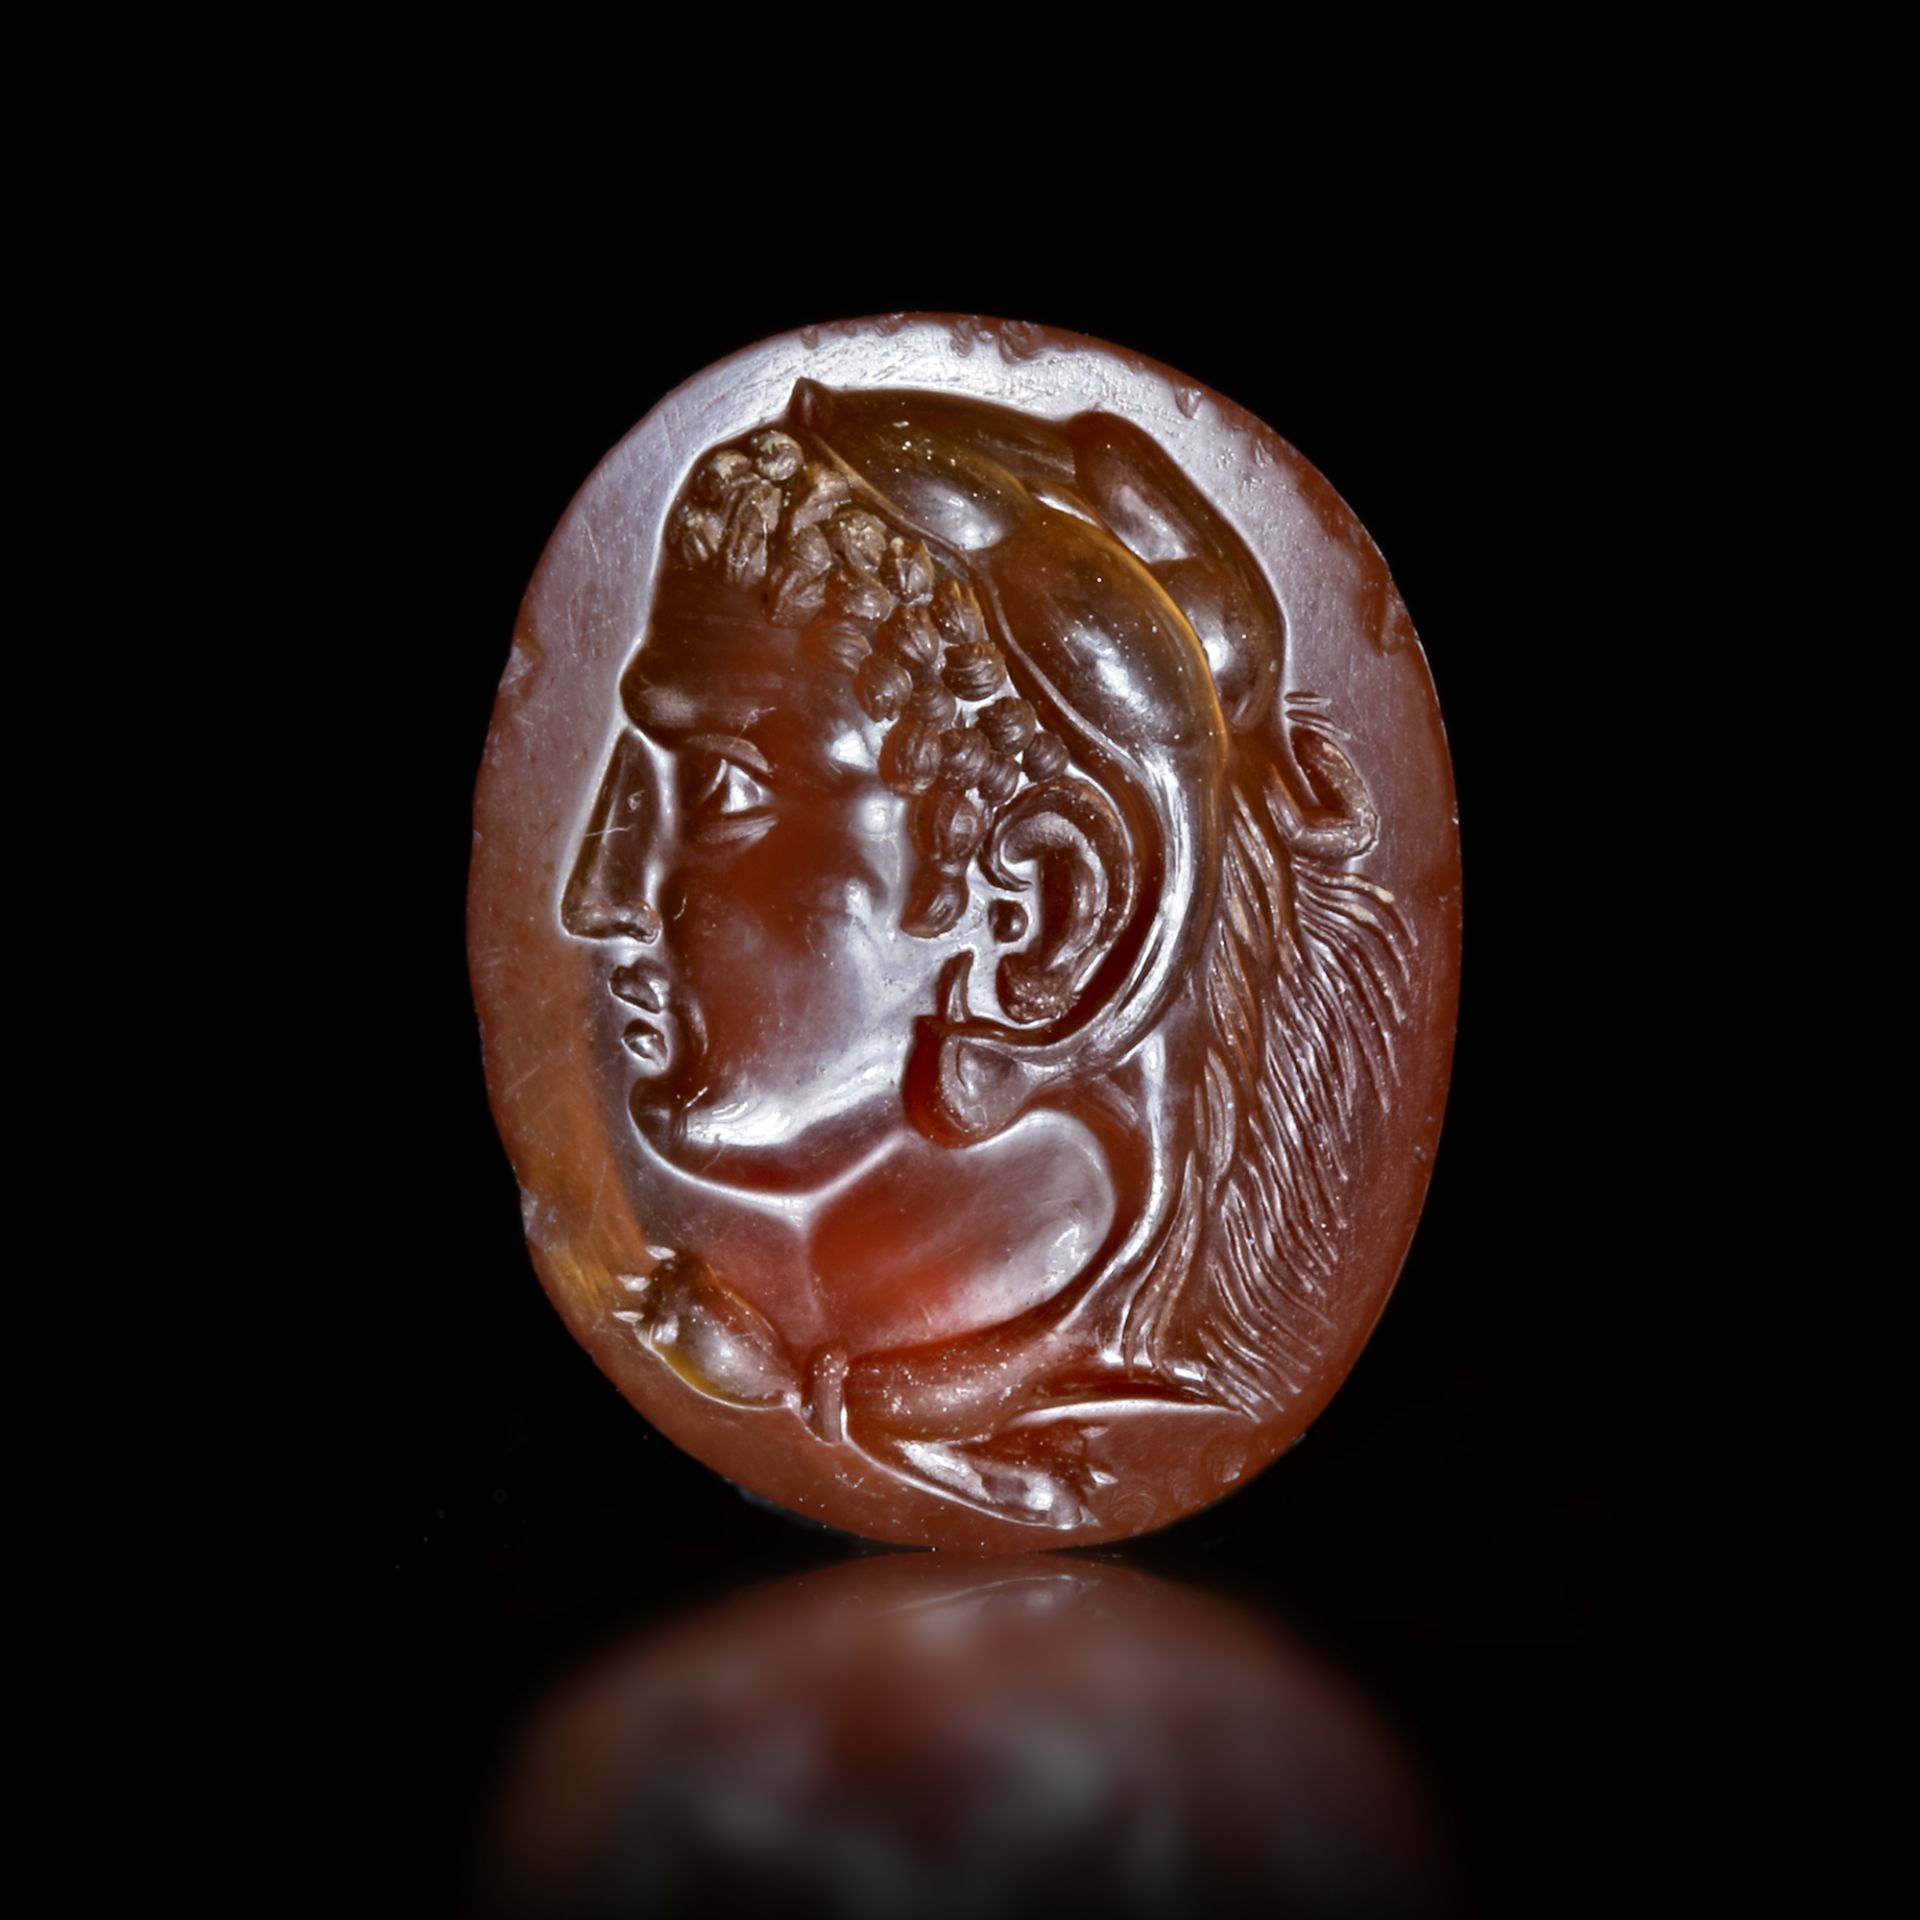 A ROMAN INTAGLIO WITH THE HEAD OF HERCULES POSSIBLY PORTRAYING ALEXANDER THE GREAT(?), 1ST CENTURY B